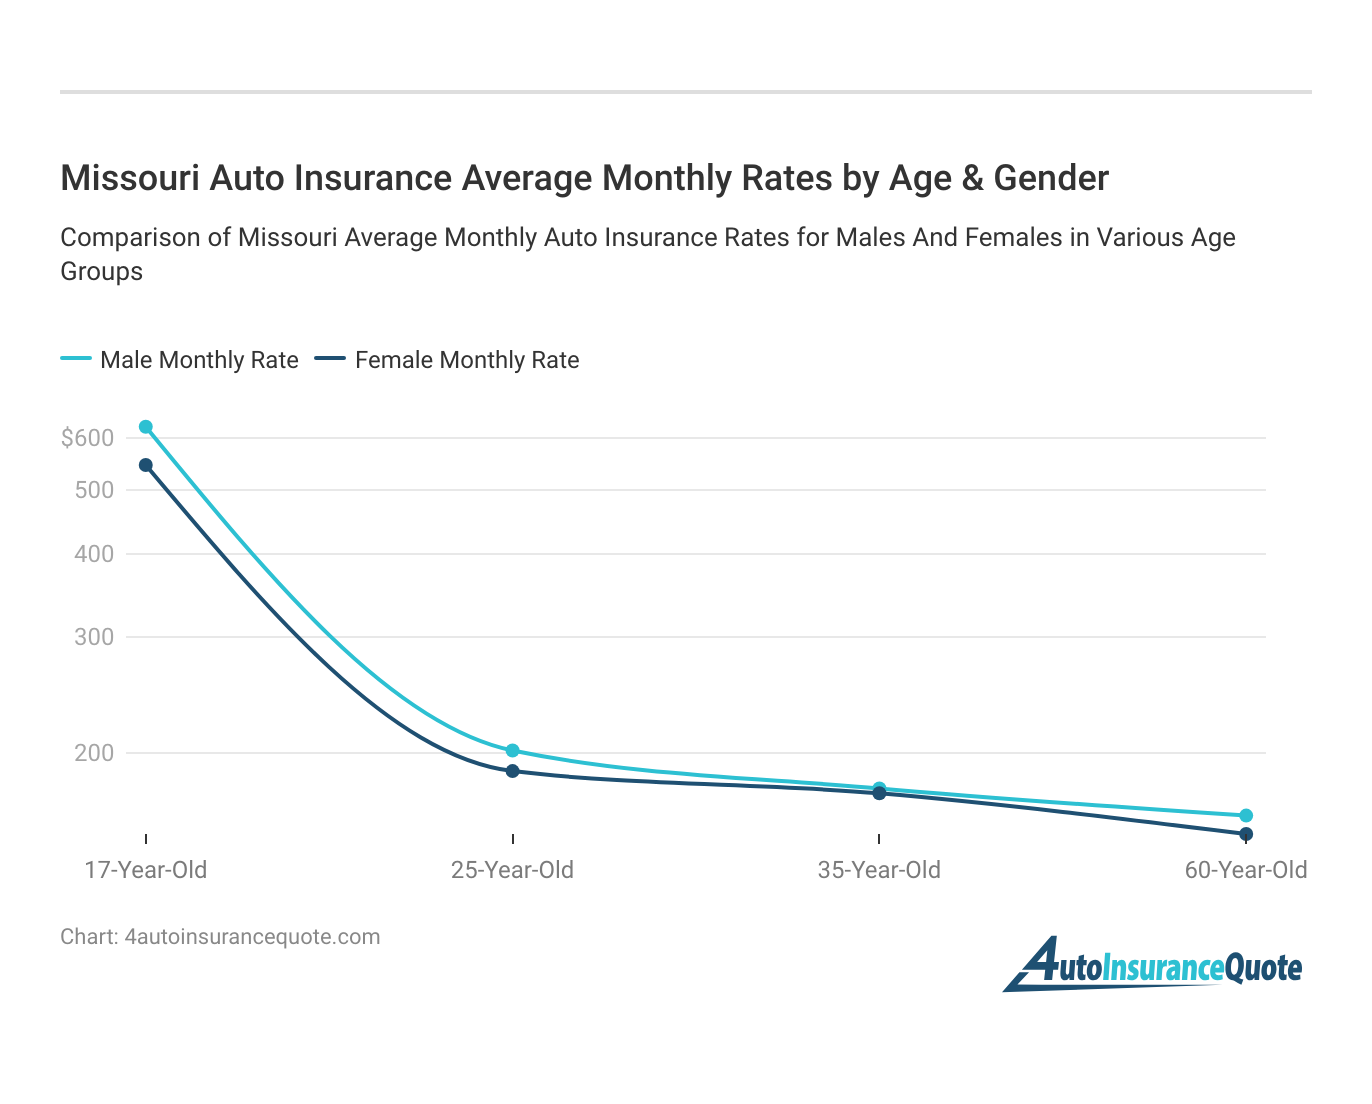 <h3>Missouri Auto Insurance Average Monthly Rates by Age & Gender</h3>